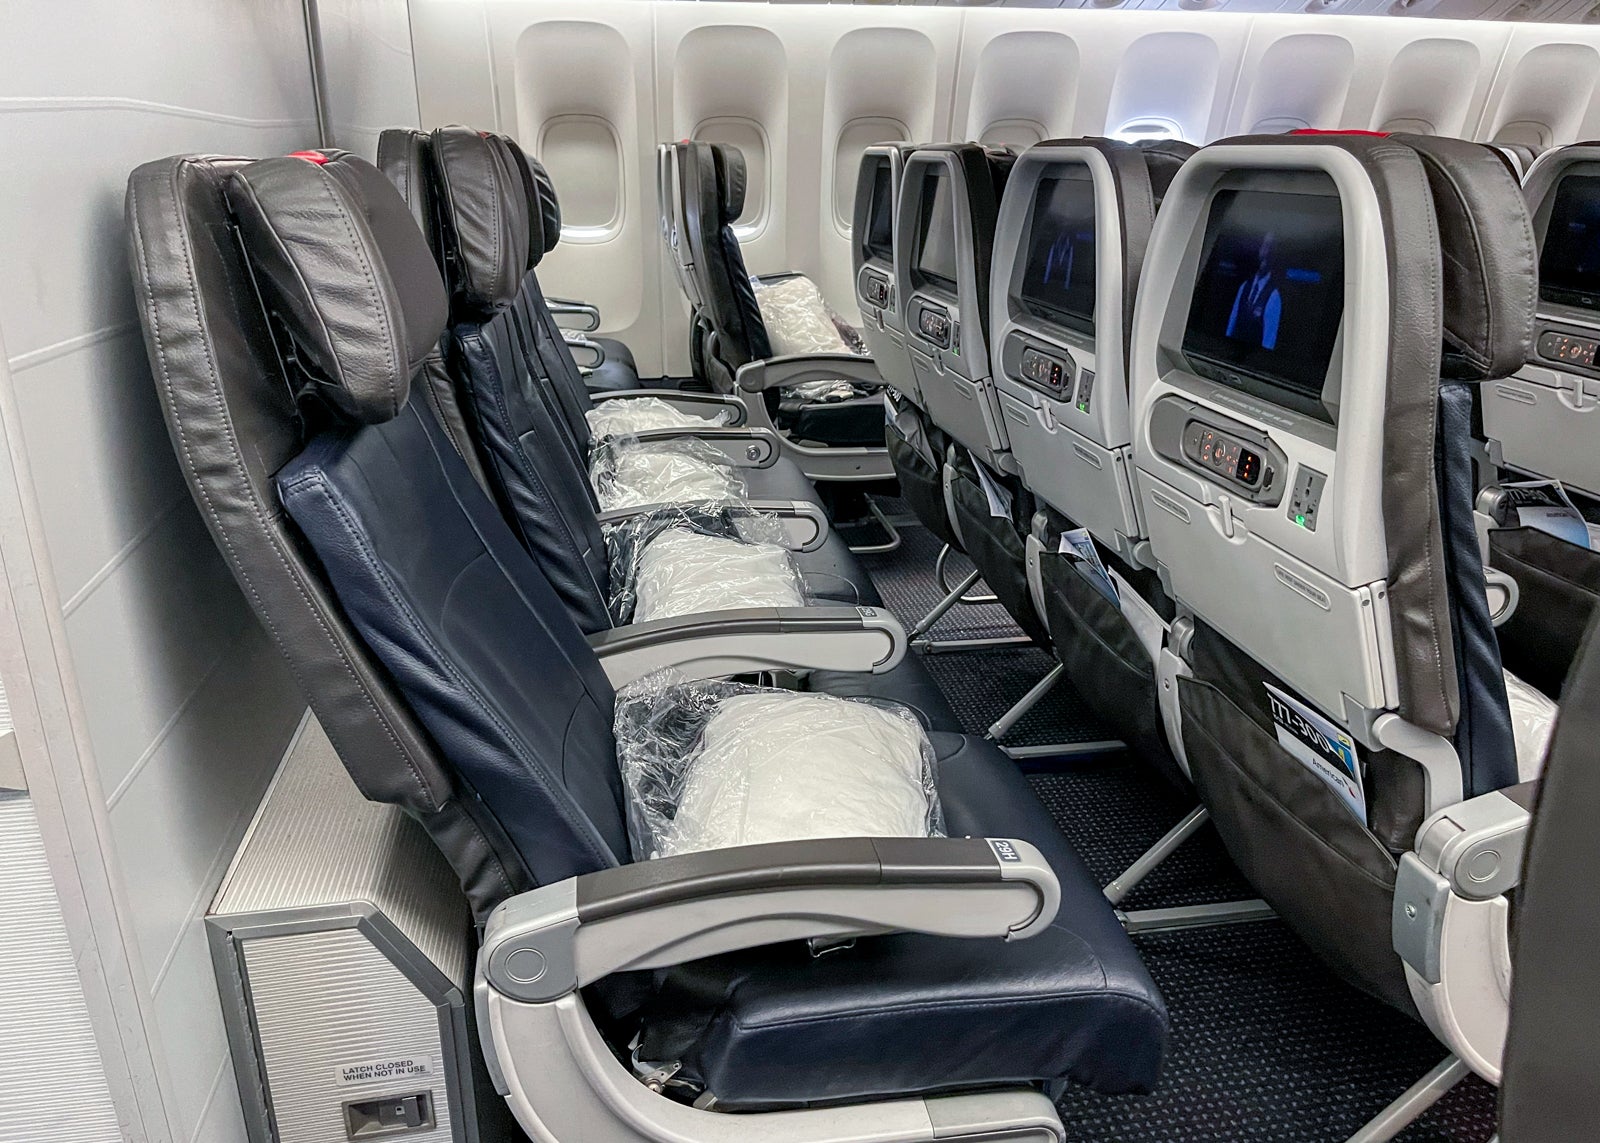 An Honest American Airlines Economy Review From Sydney To LA